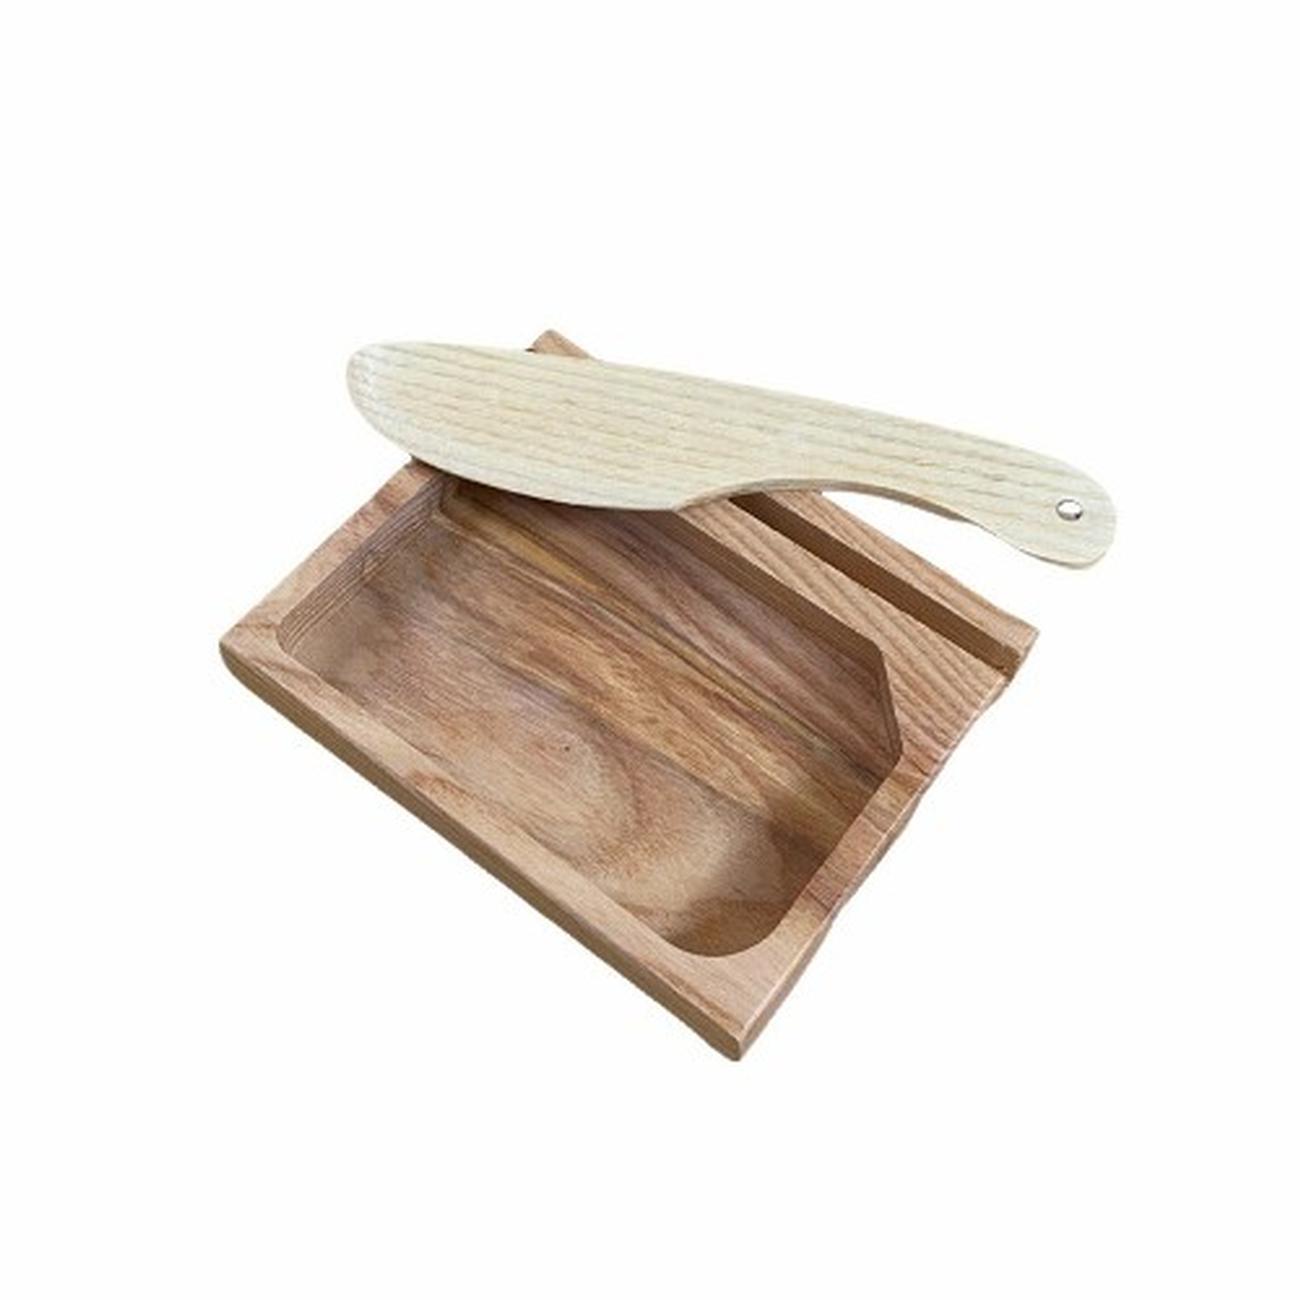 caulfield-butter-dish-with-knife-ash - Caulfield Country Boards Ash Butter Dish & Knife